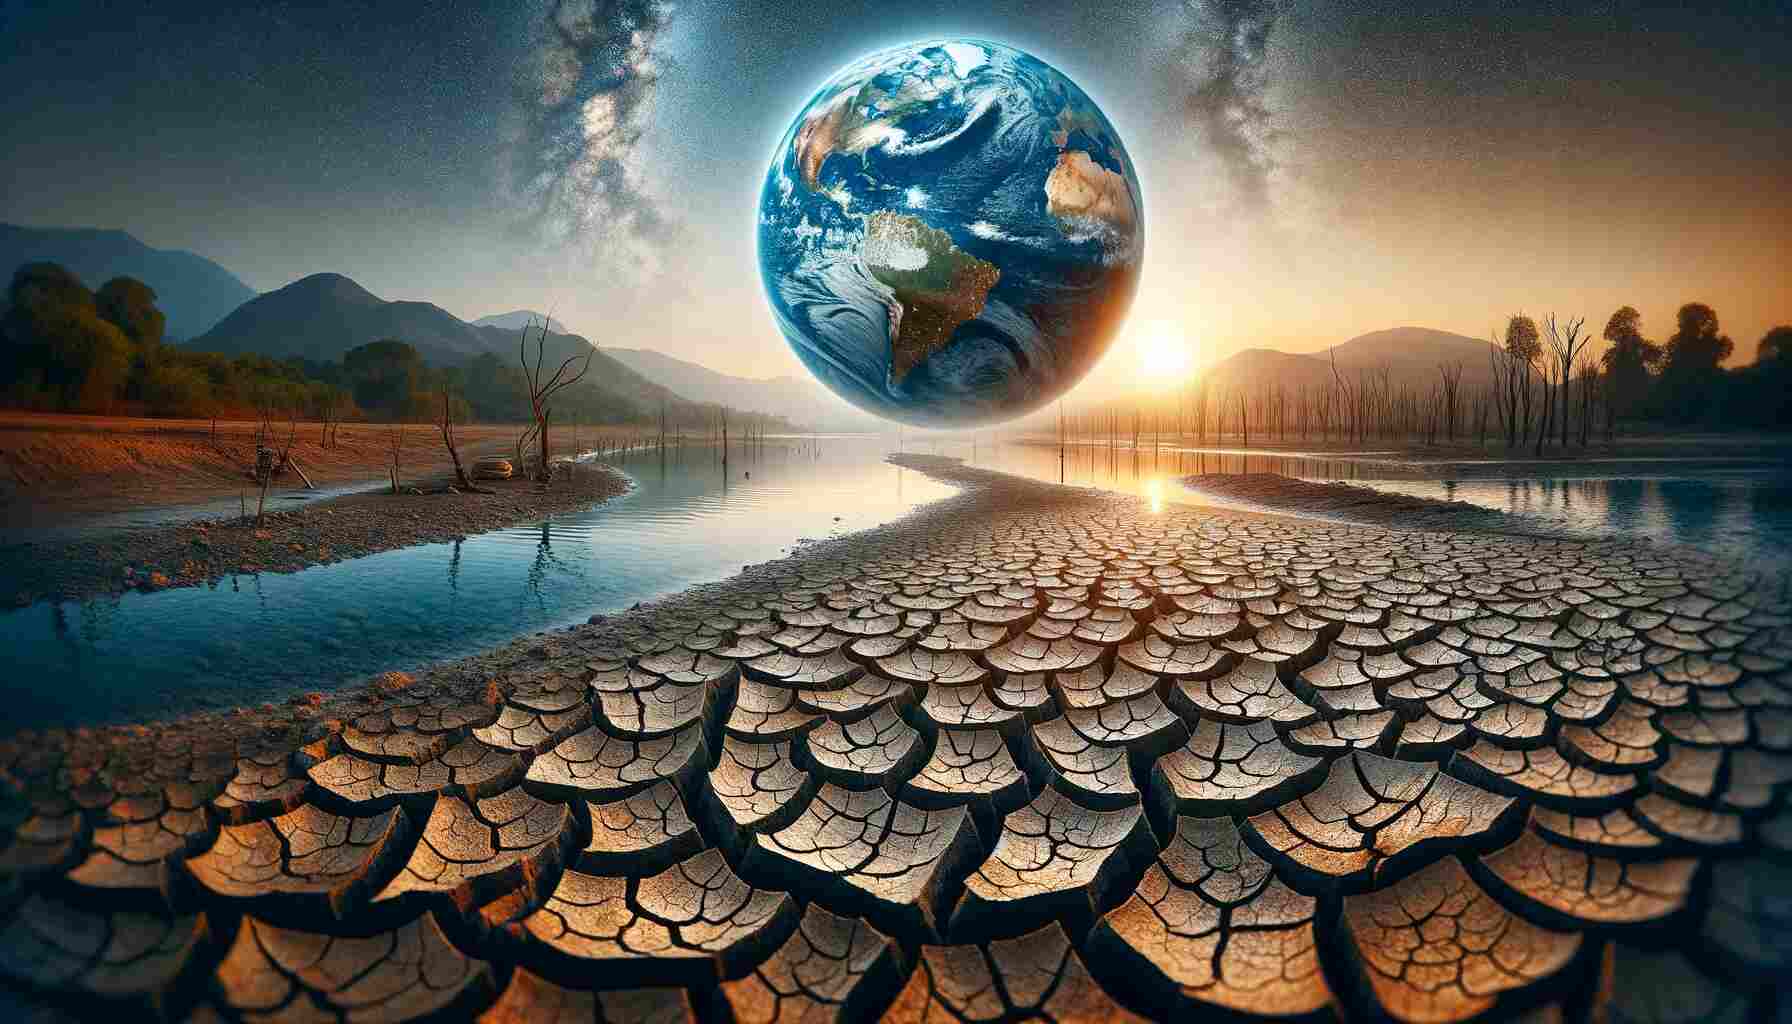 A stark image depicting the global groundwater crisis, with a parched and cracked earth surface symbolizing depleted aquifers. The landscape features dried-up riverbeds, withered plants, and a drought-affected backdrop. In the background, a representation of the Earth highlights the worldwide scale of this environmental issue, emphasizing the urgency and global impact of groundwater depletion.